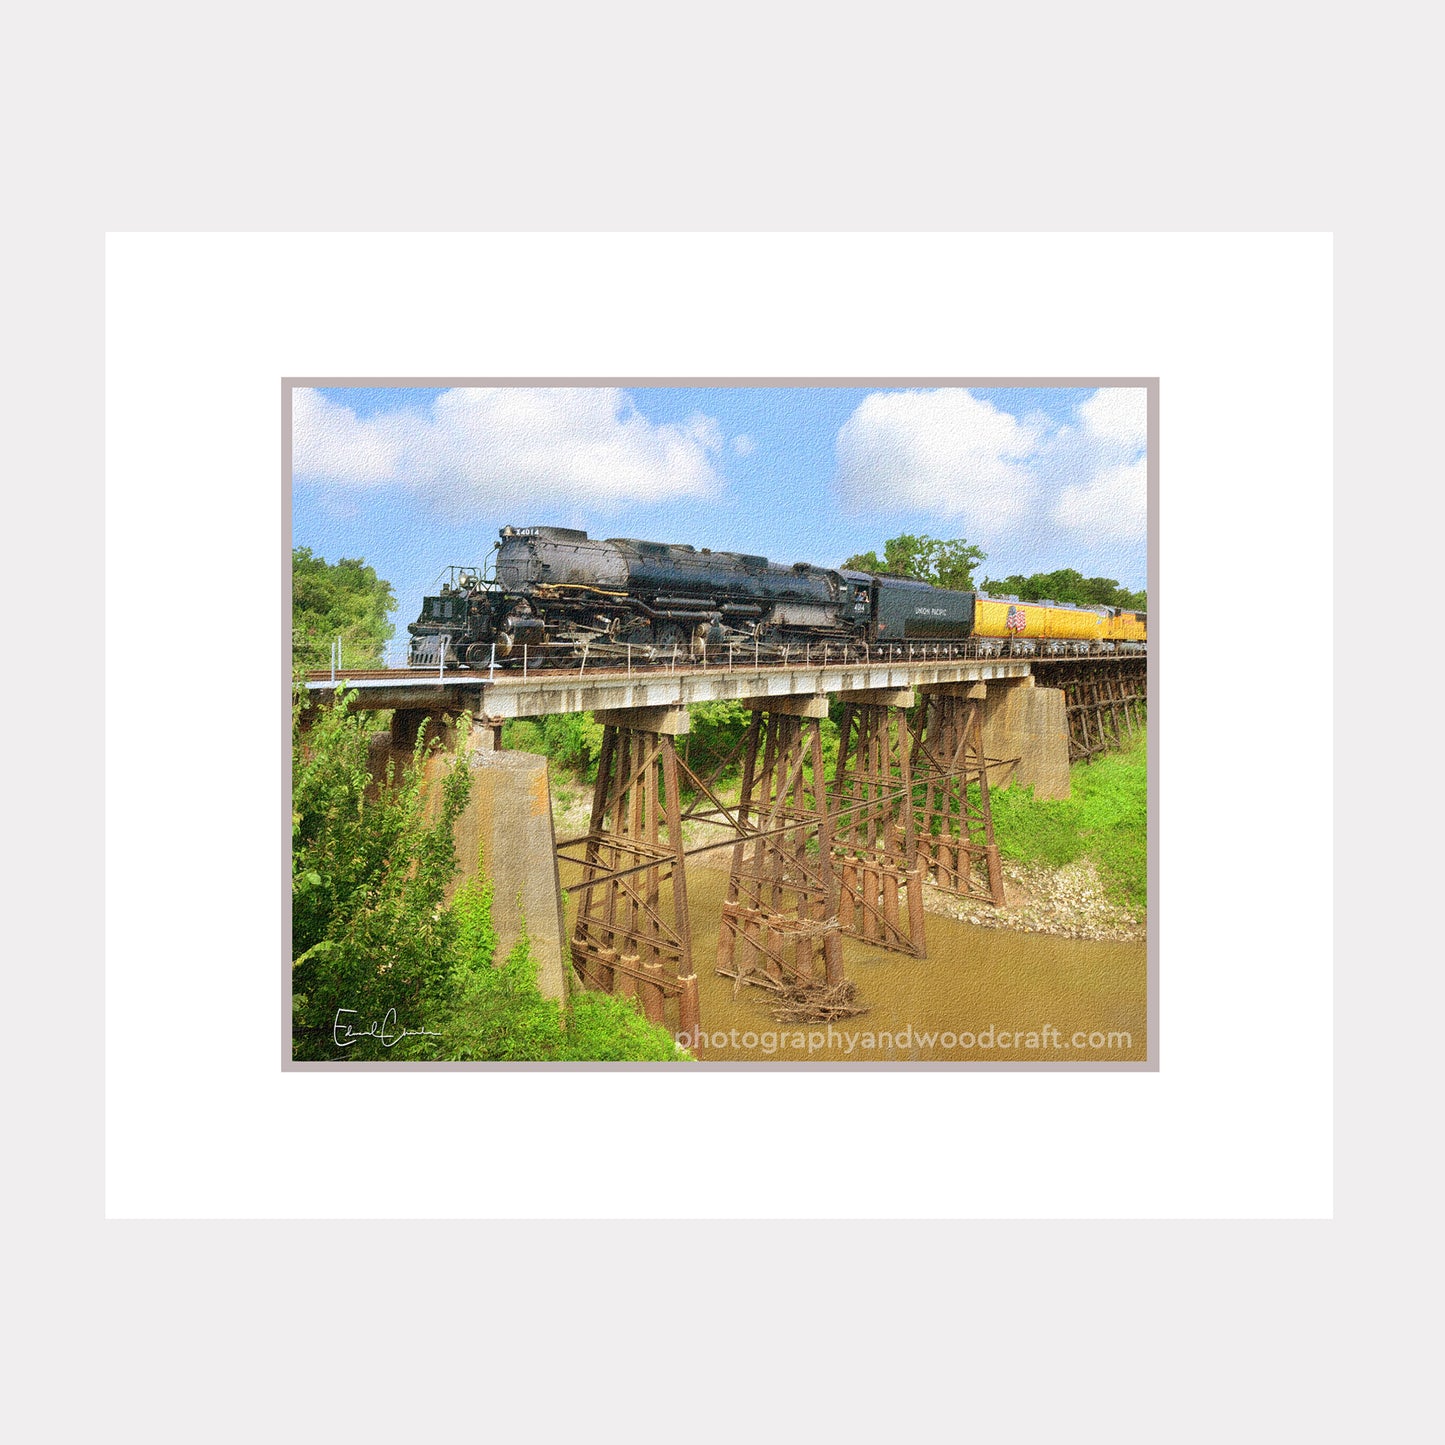 Union Pacific 4014 Locomotive over the Navasota River (11" x 14") Matted Canvas Print